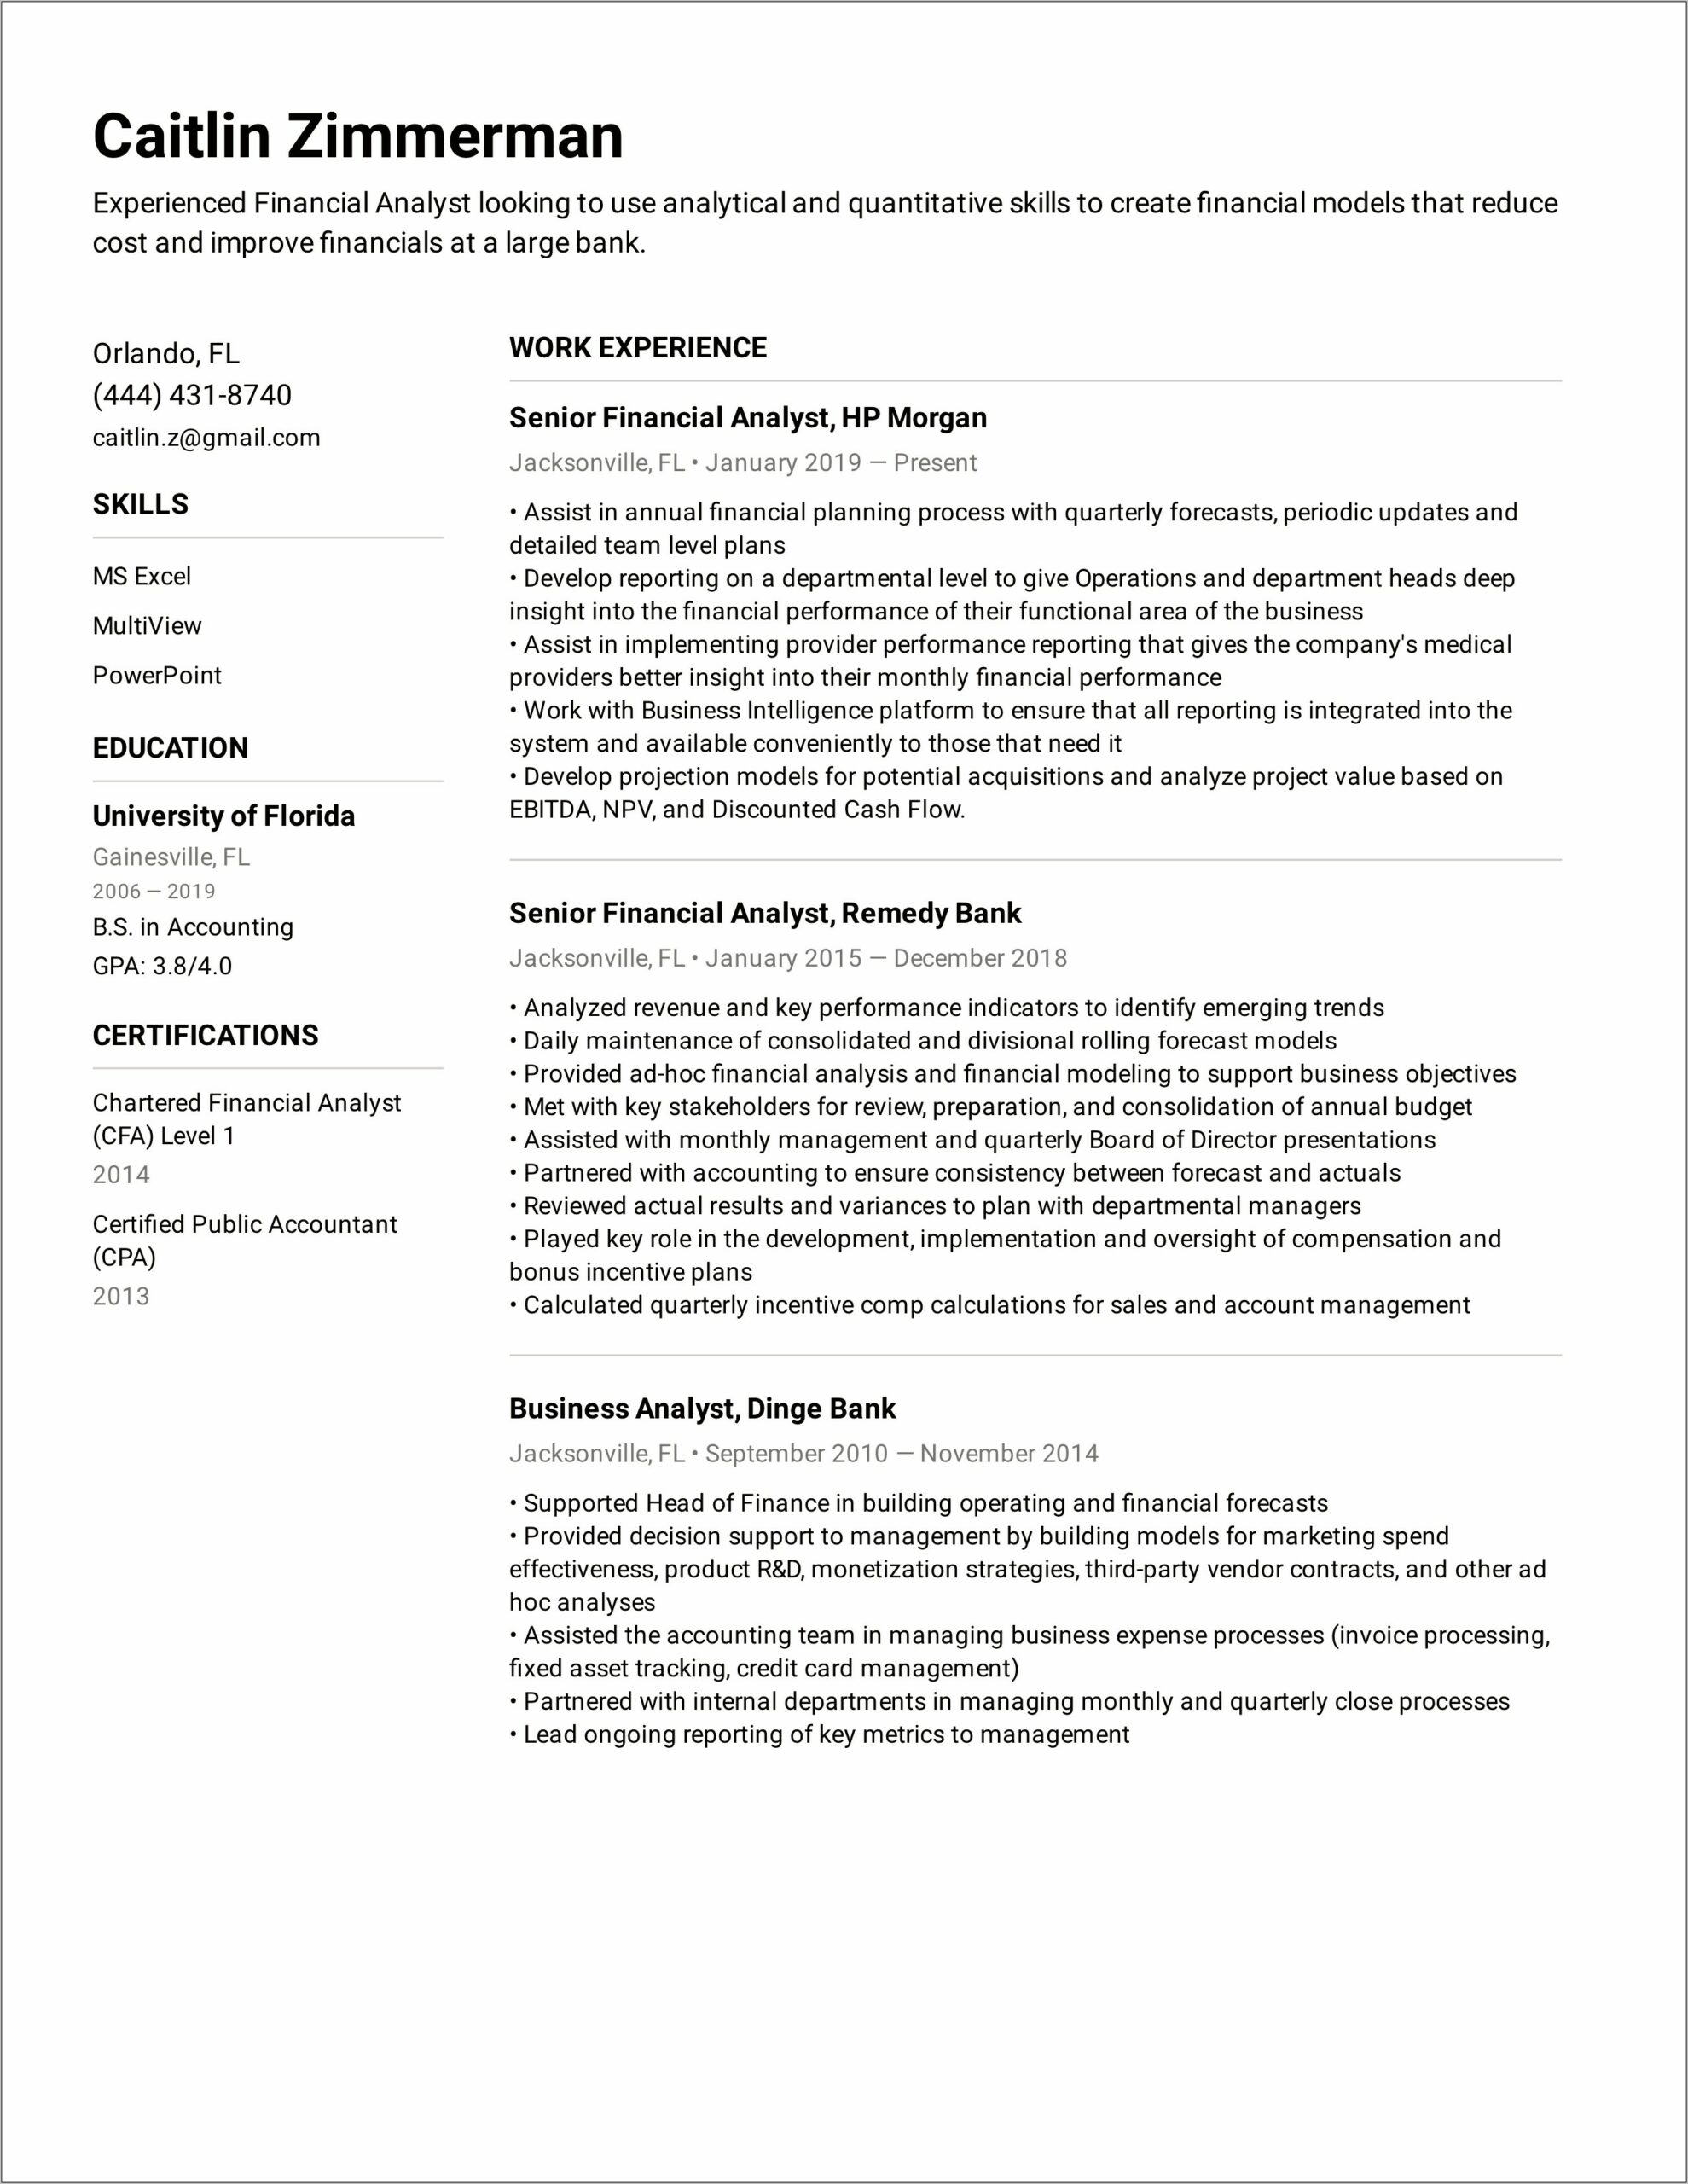 Create A Image For Resume Skills